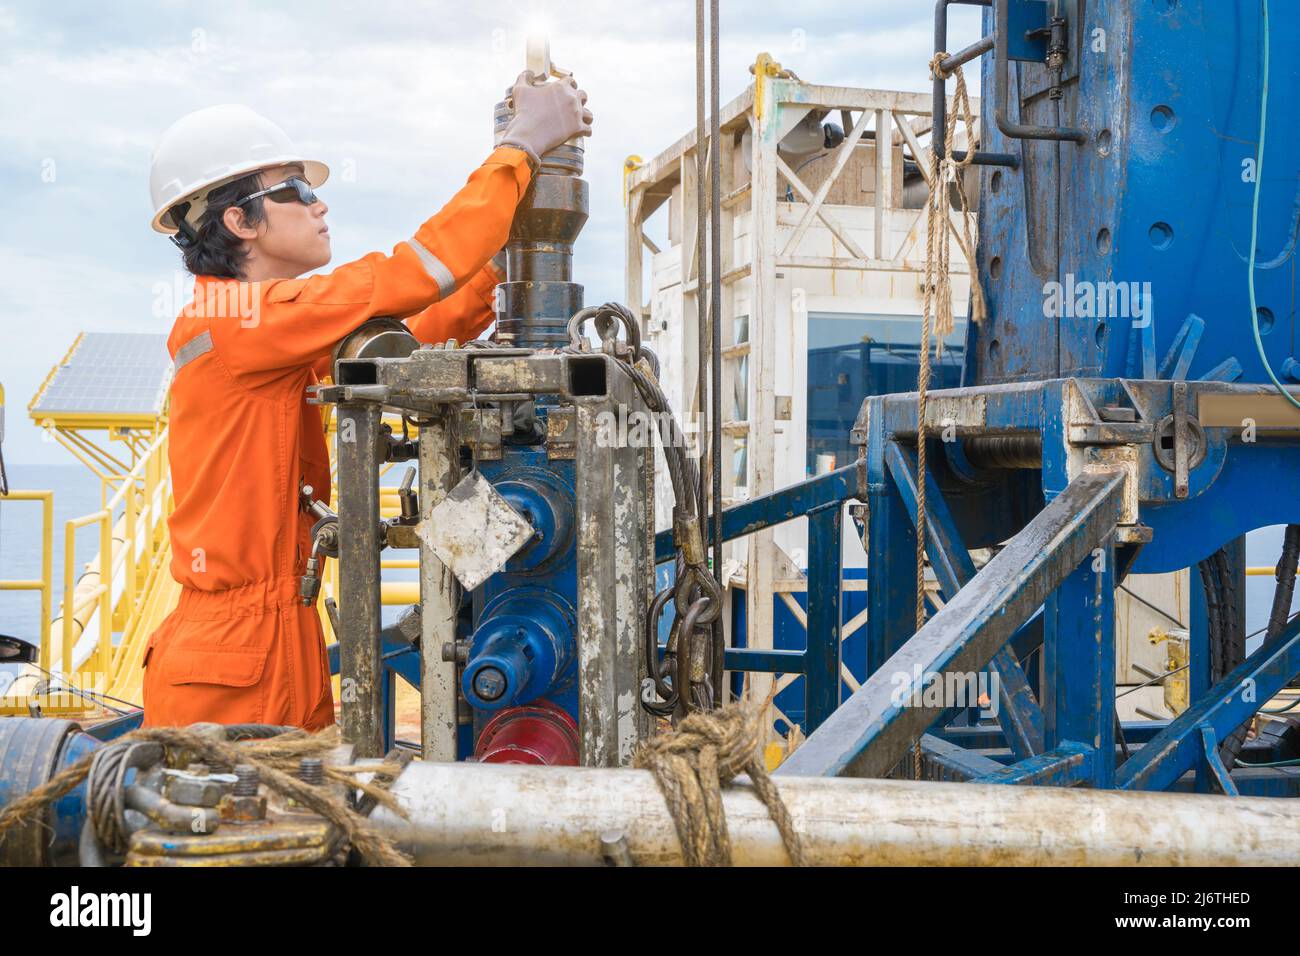 Offshore oil rig worker prepare tool and equipment for perforation oil and gas well at wellhead remote platform. Stock Photo